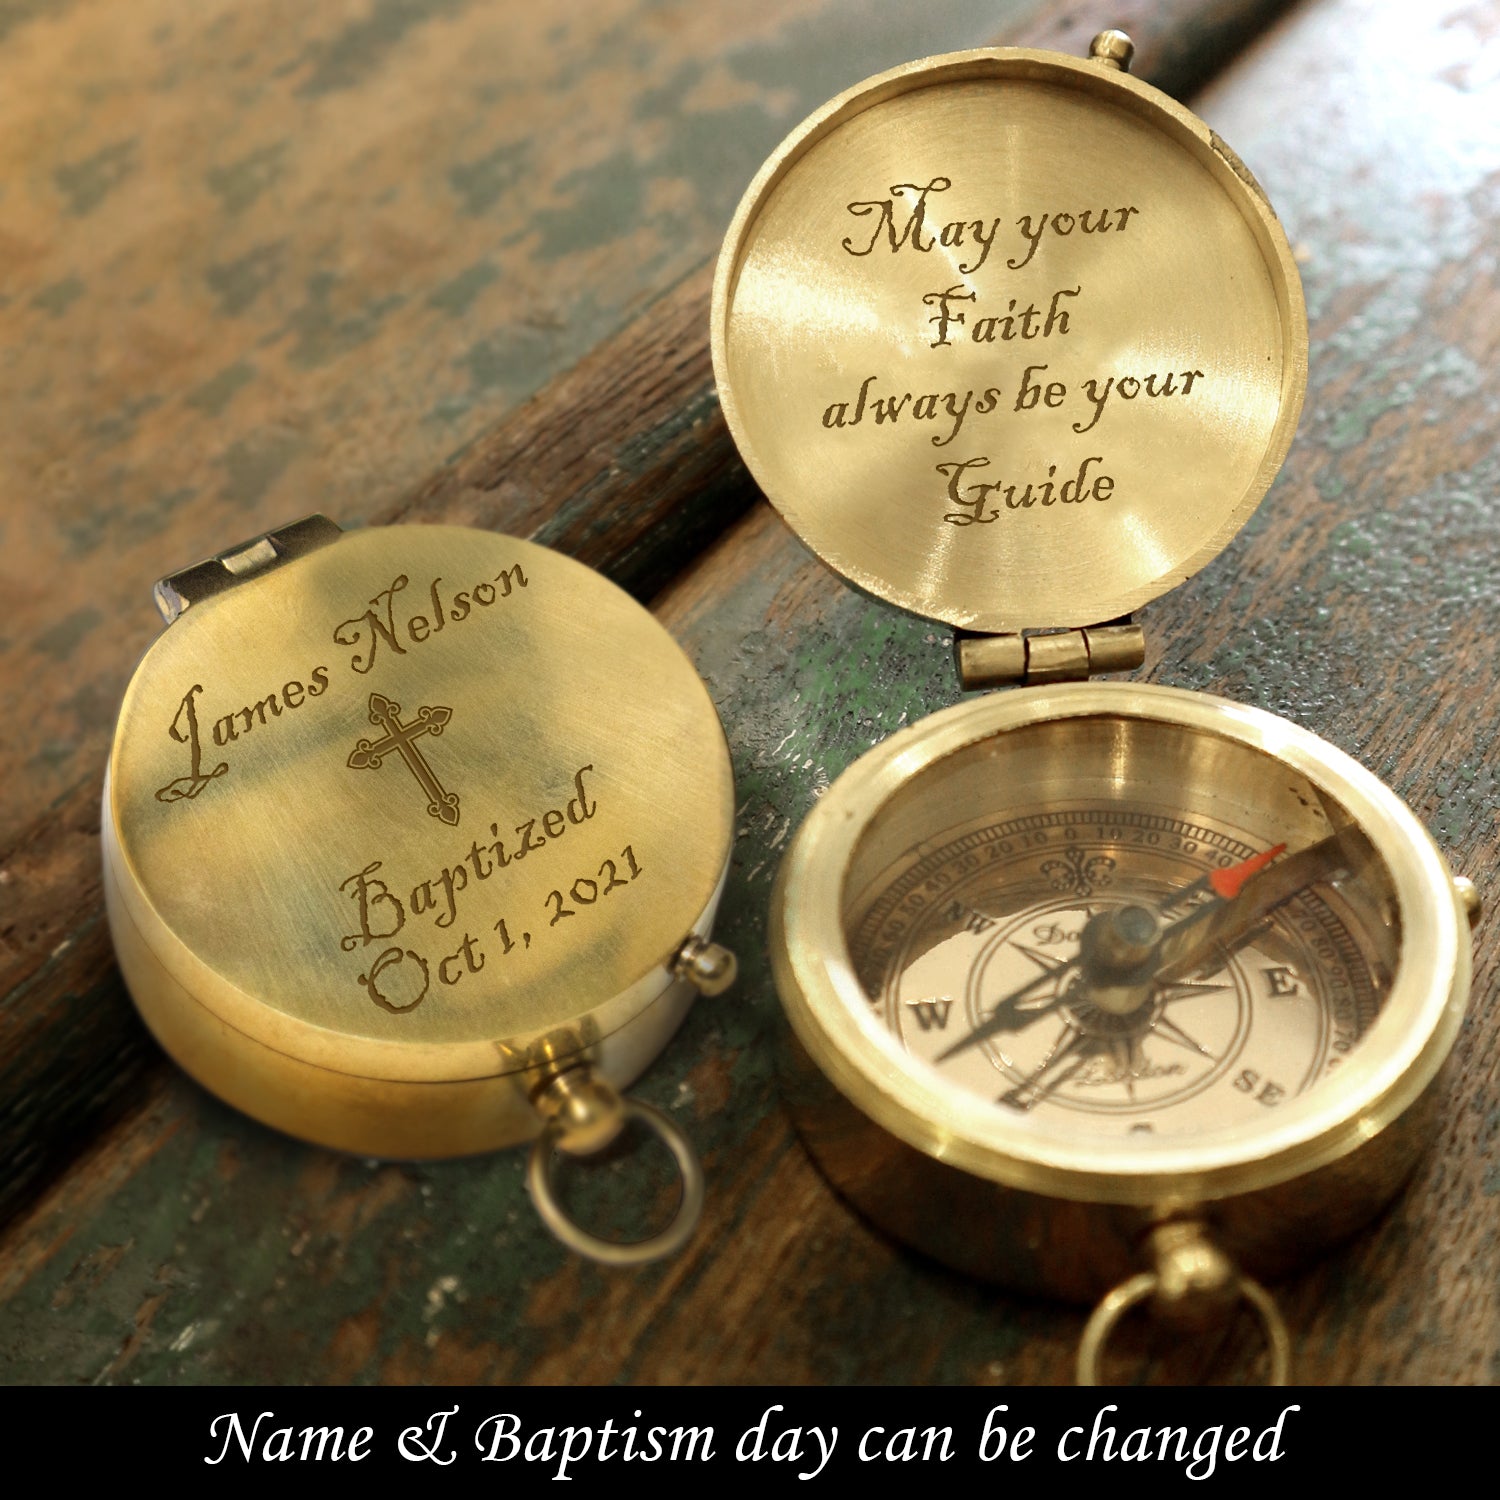 Personalised Engraved Compass - God - To My Lover - May Your Faith Always Be Your Guide - Ukgpb26038